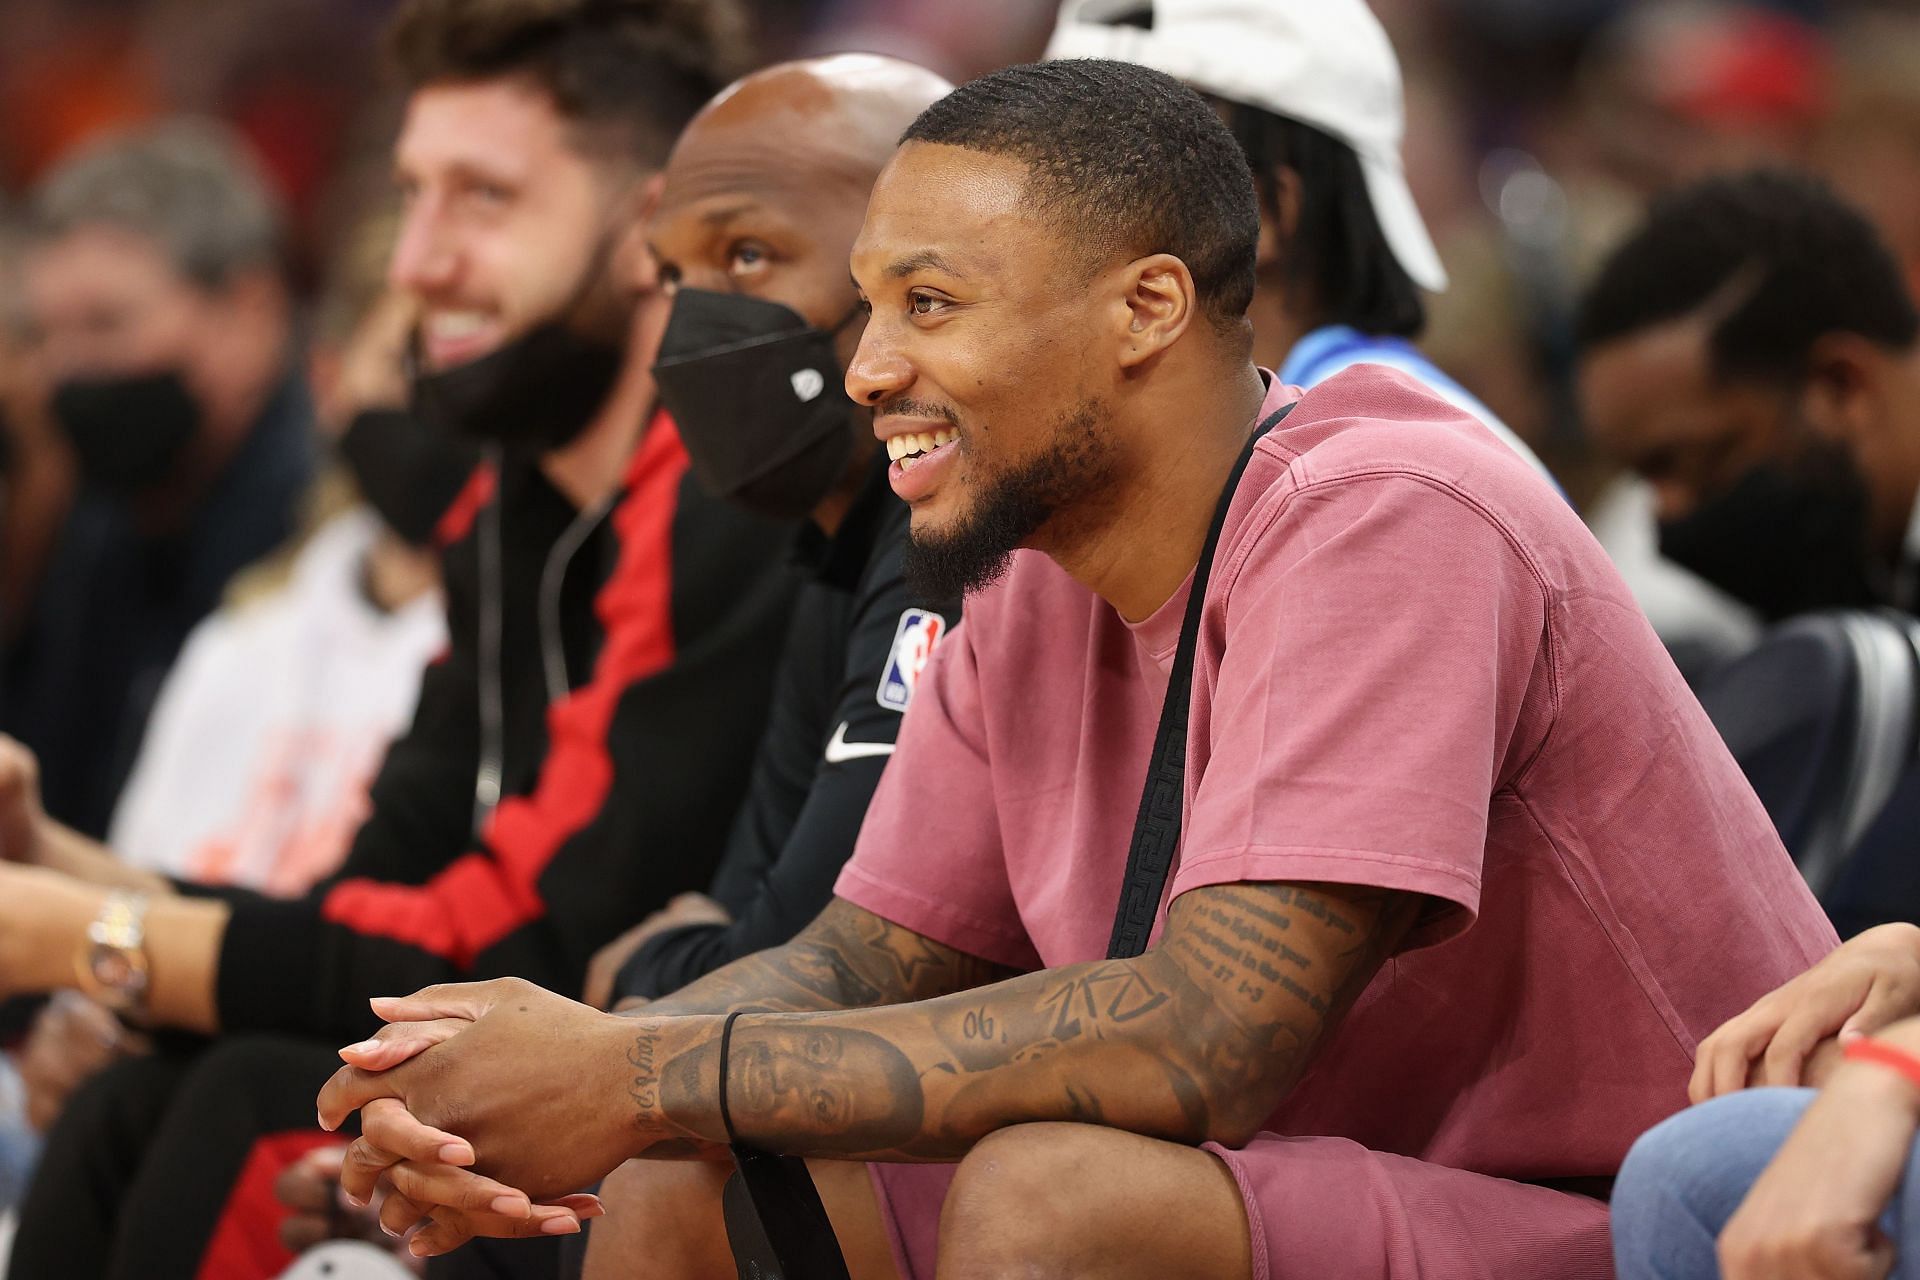 Portland Trail Blazers Damian Lillard is rested for the game against the Golden State Warriors